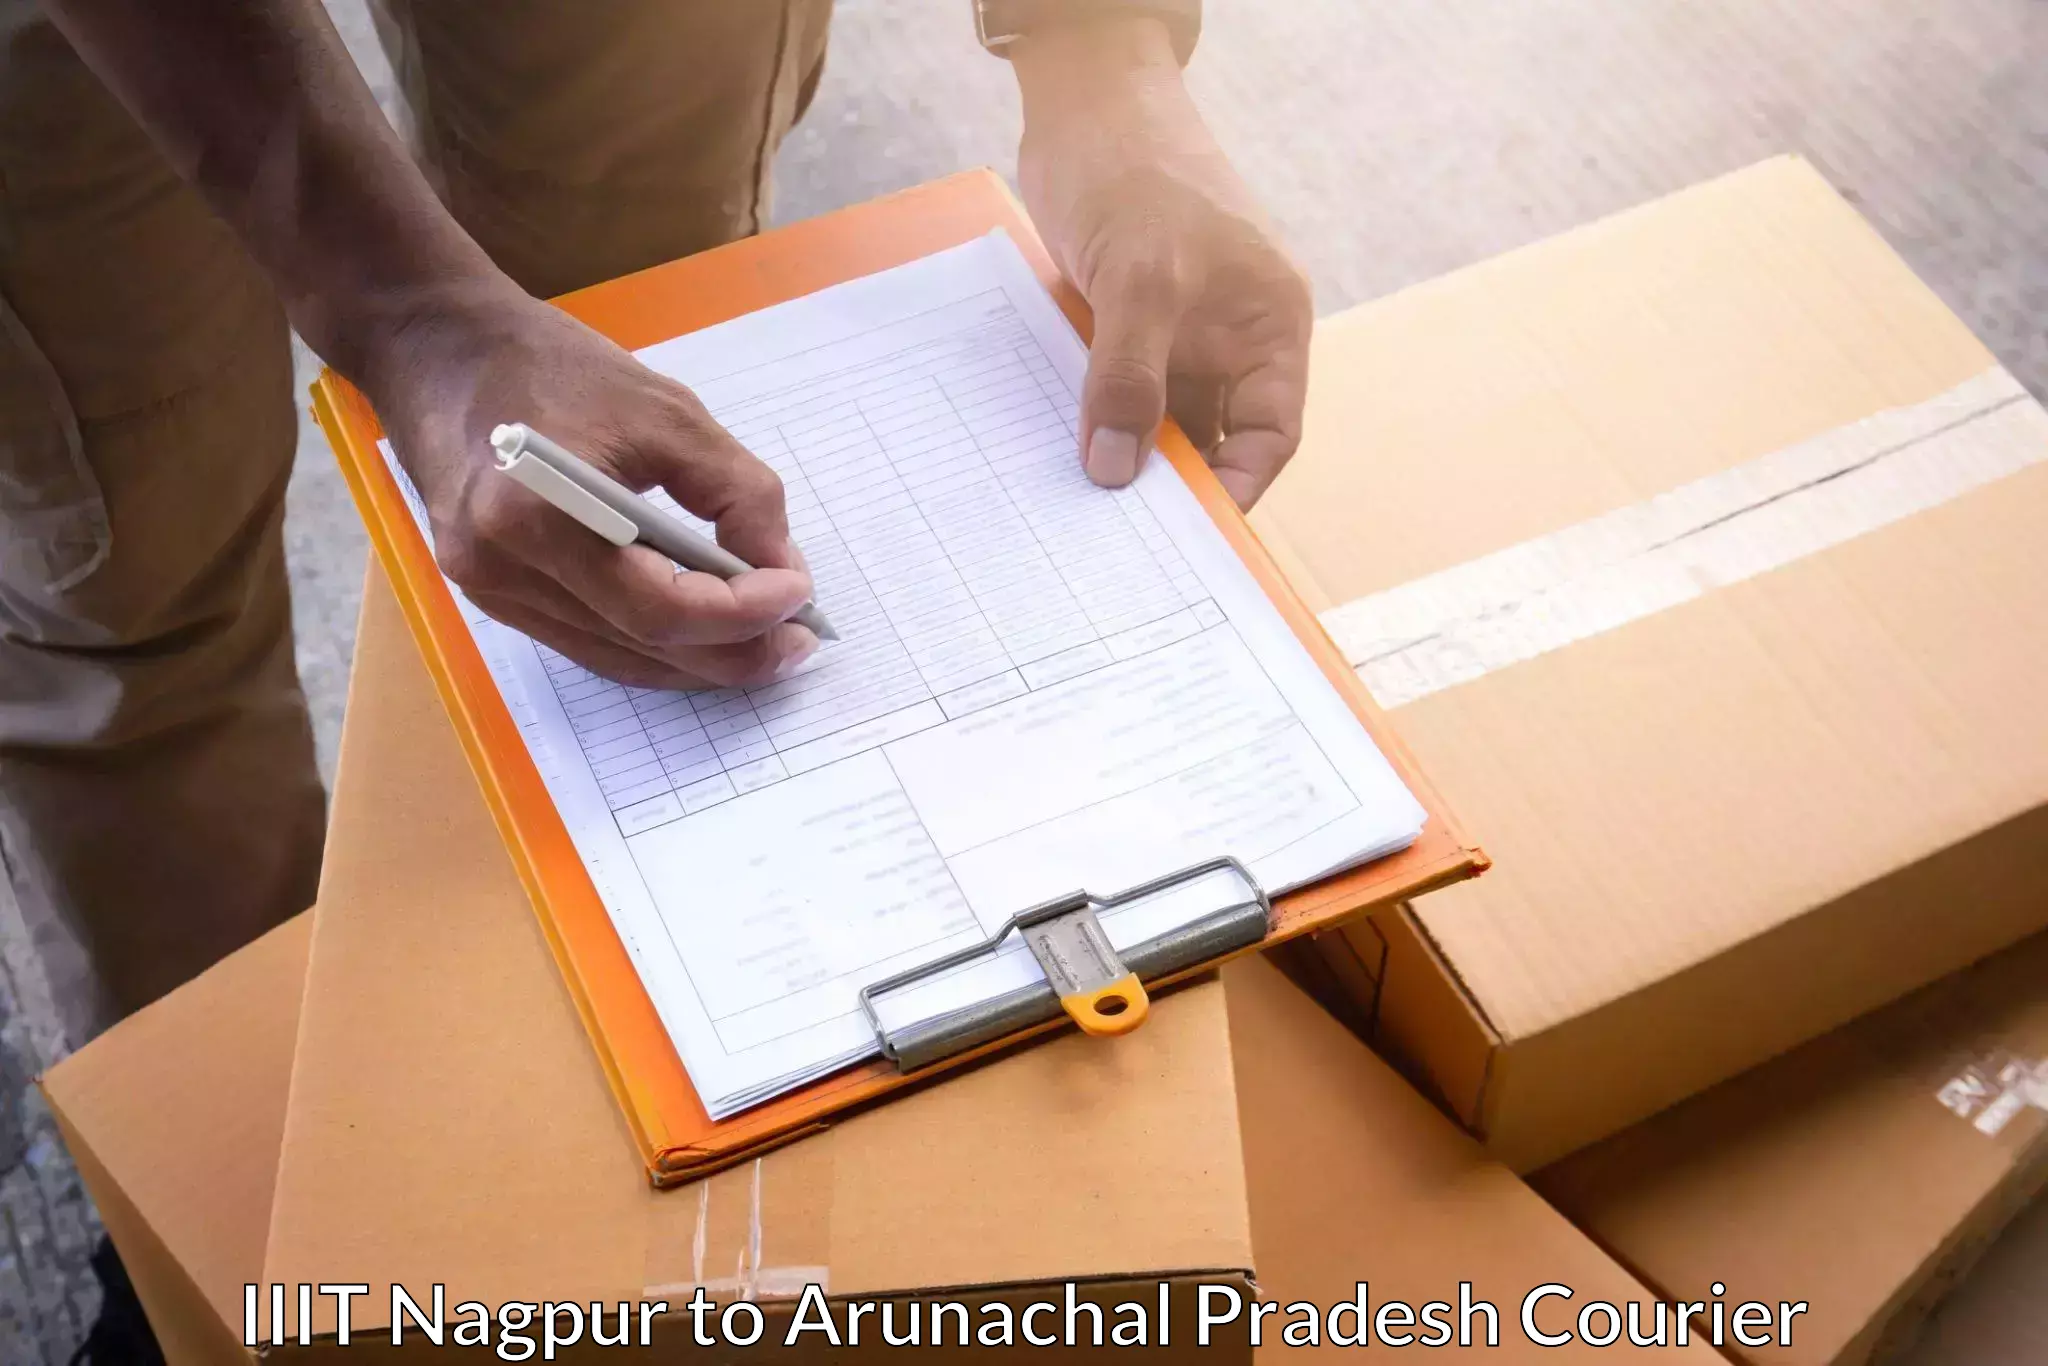 Personalized courier experiences IIIT Nagpur to Nirjuli